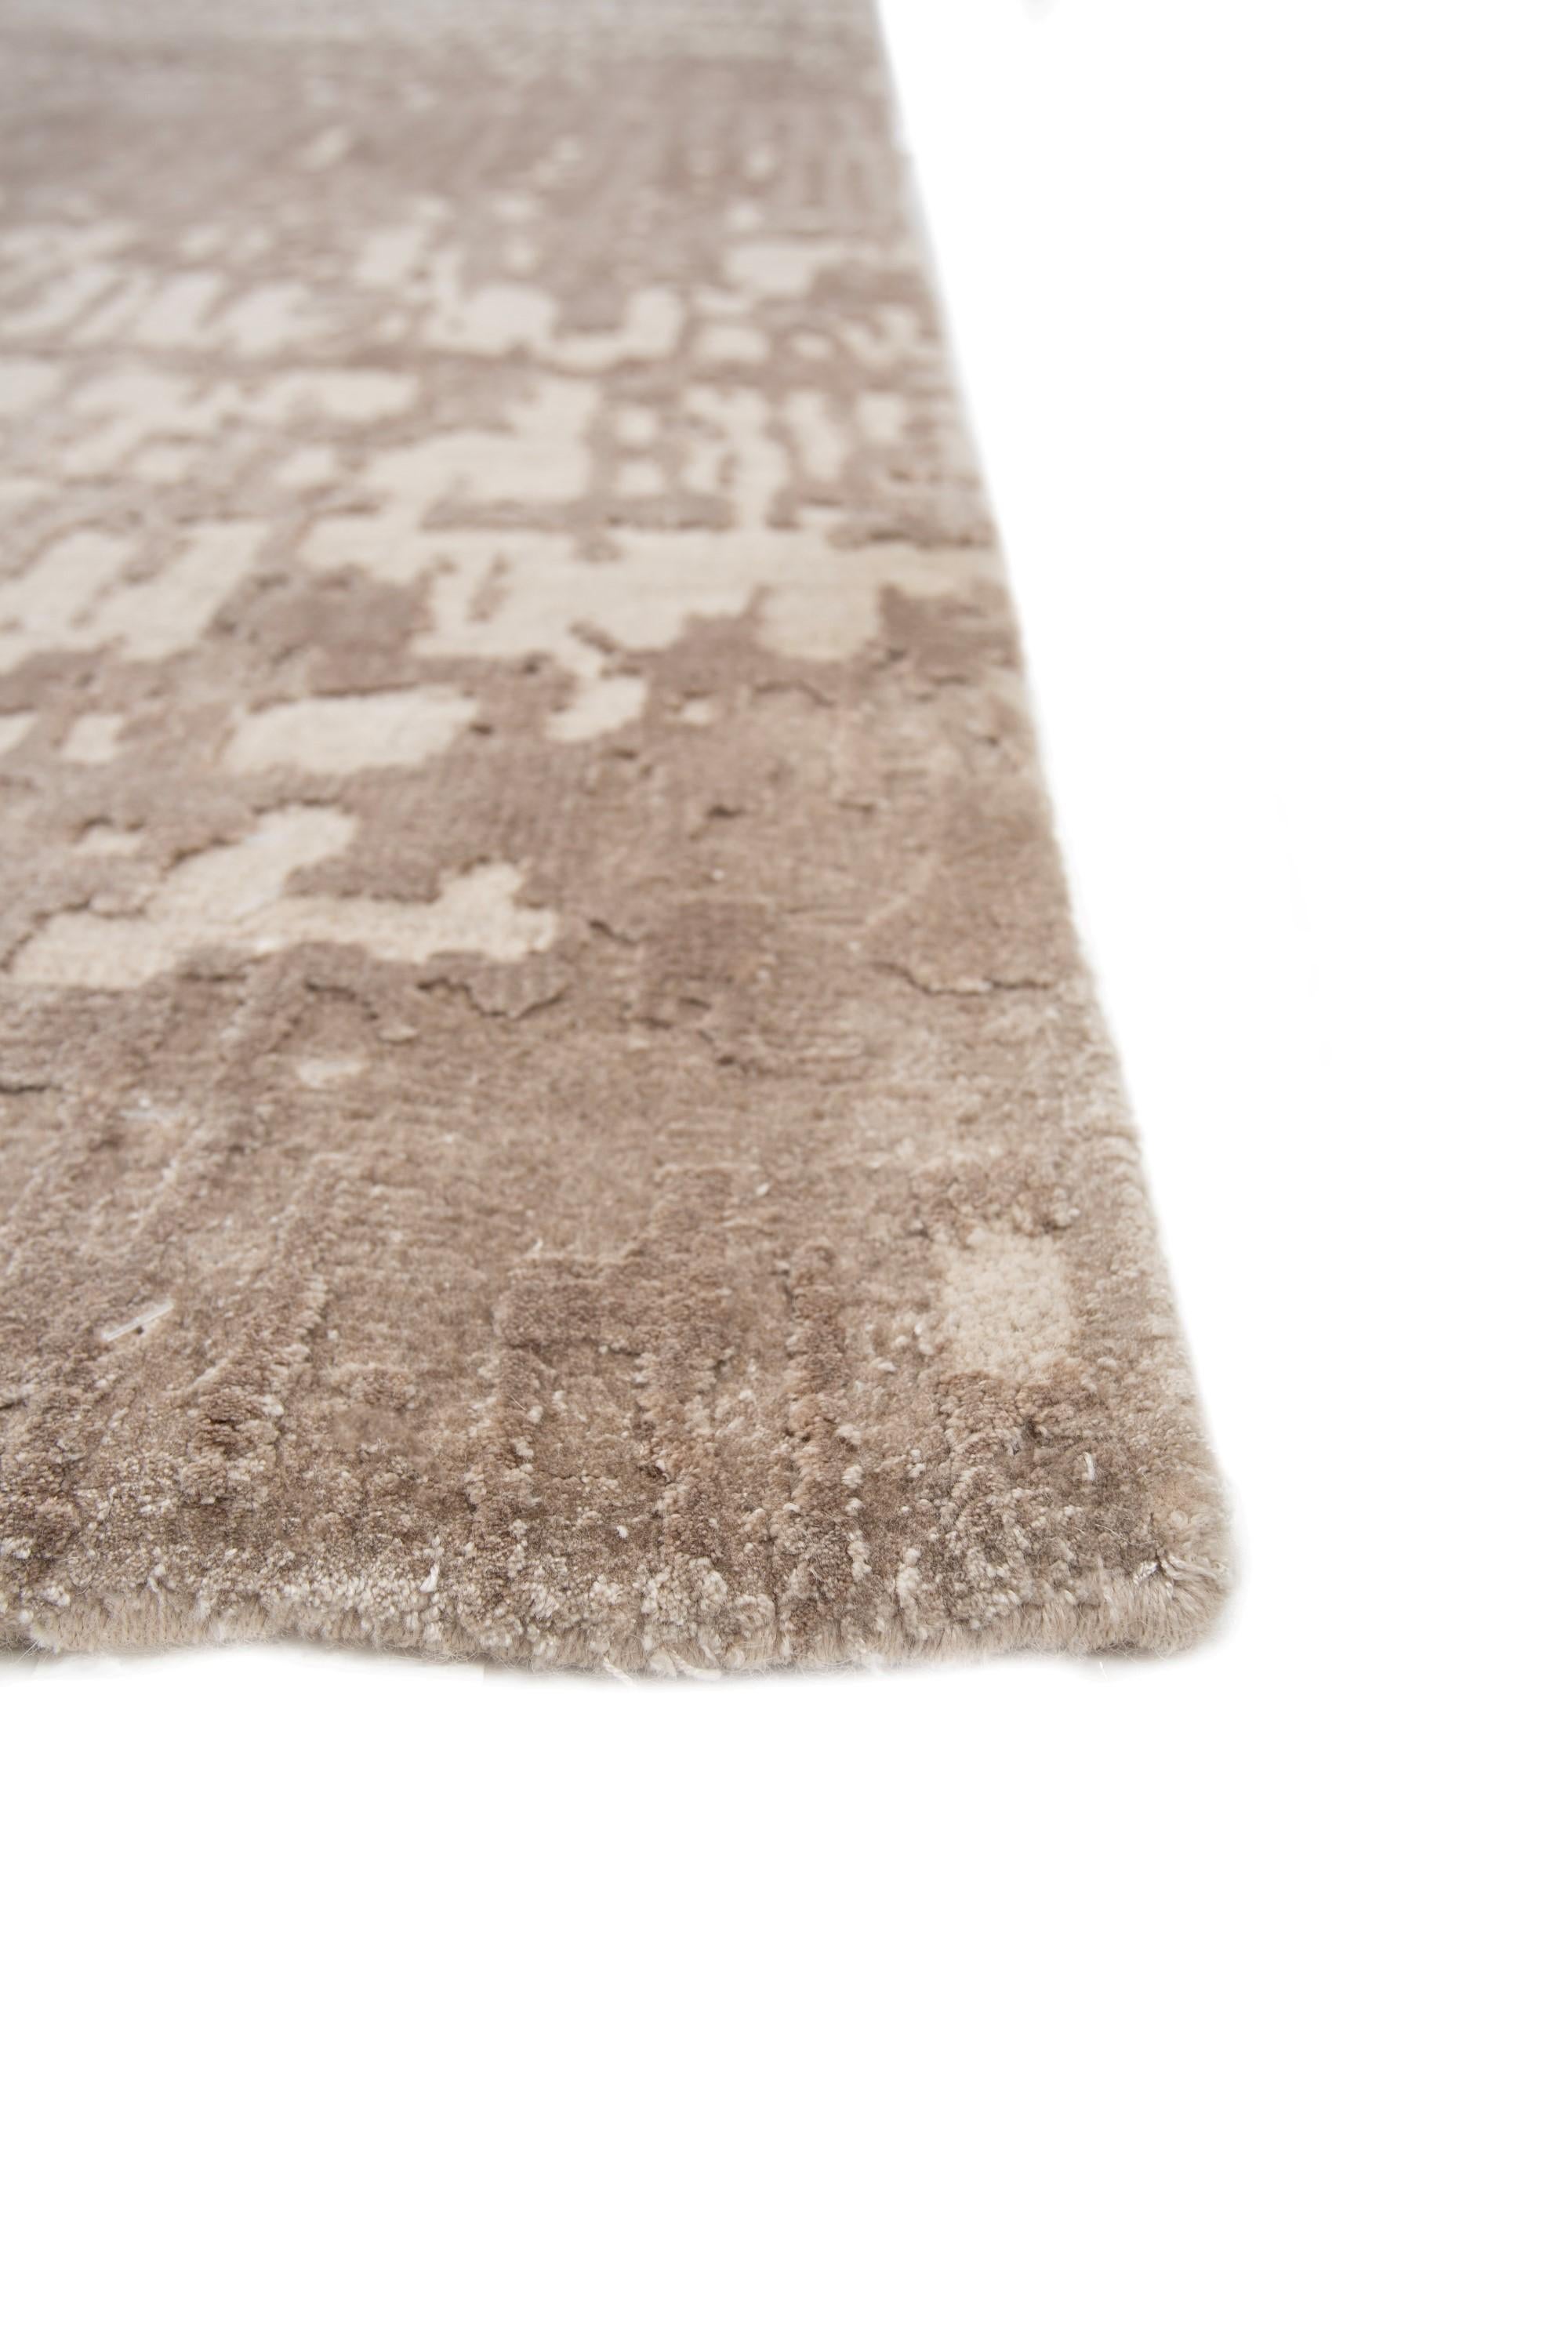 Elevate the mood with this tone-on-tone, hand-knotted rug crafted in rural India. Immerse your surroundings in instant uplift, as the antique white ground and white sand border seamlessly blend, offering a palette that radiates warmth and comfort.